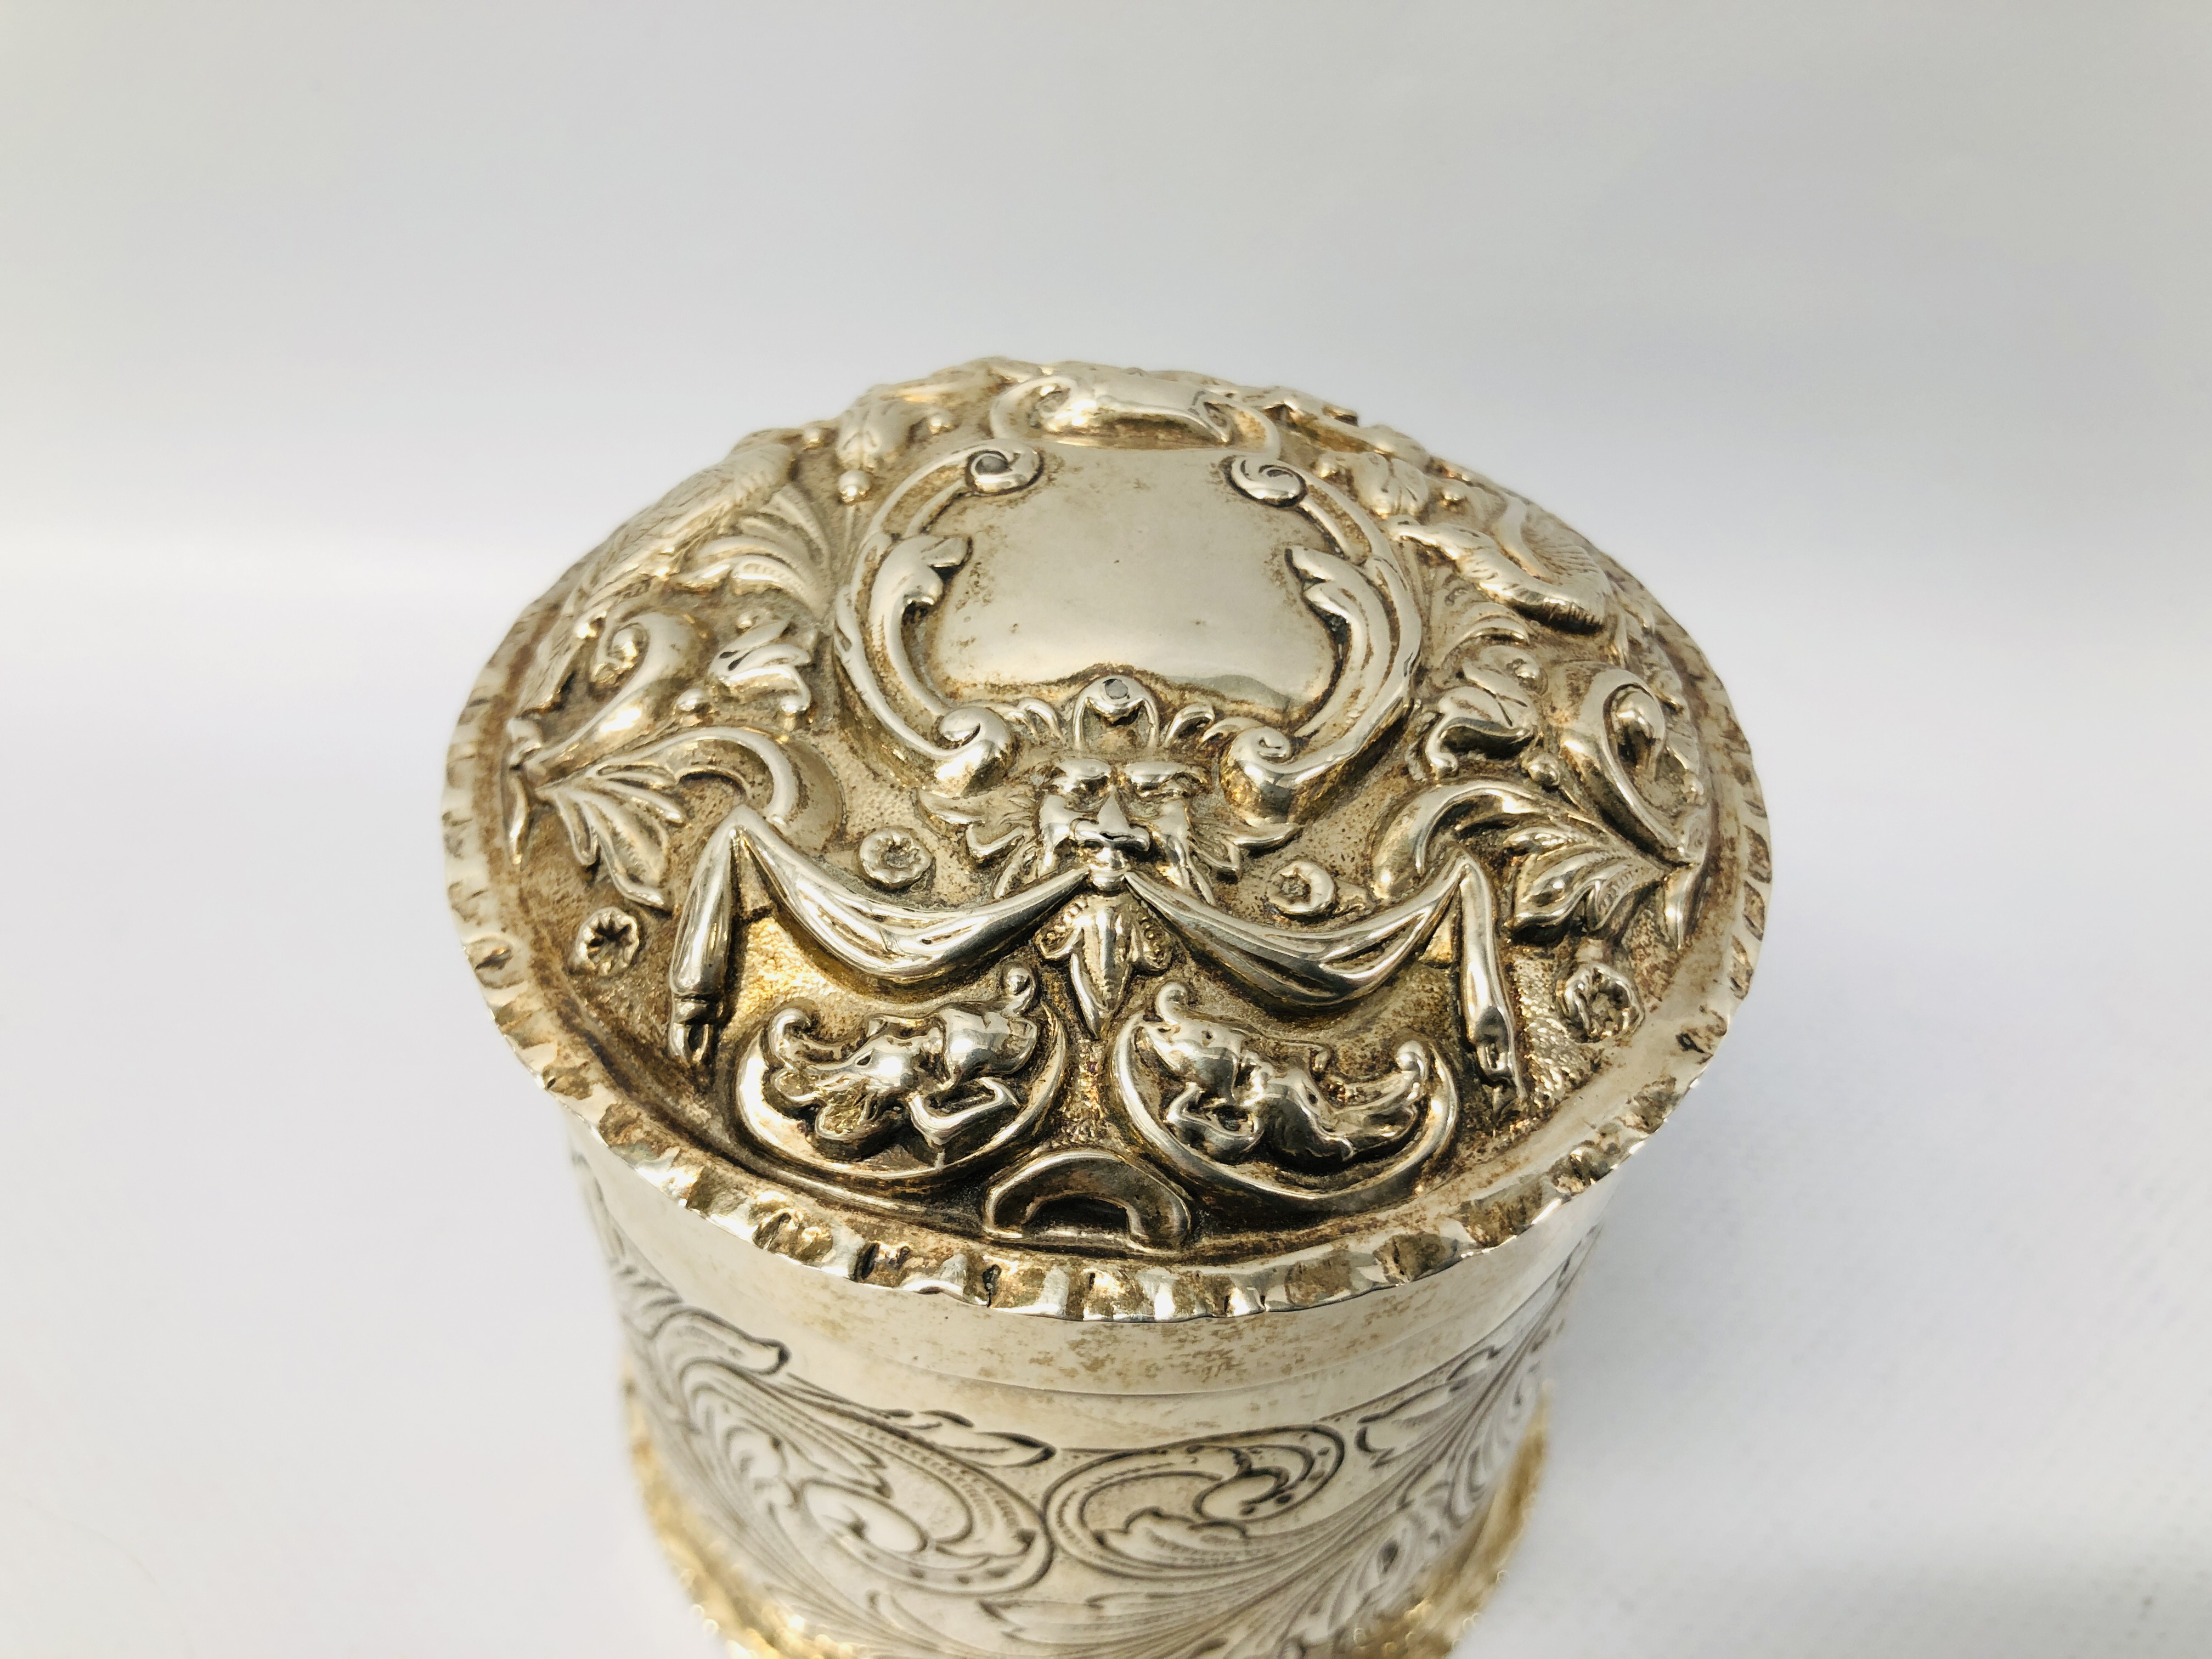 A VICTORIAN SILVER CYLINDRICAL BOX AND COVER DECORATED WITH BIRD LONDON 1888, WILLIAM COMINS - H 8. - Image 3 of 21